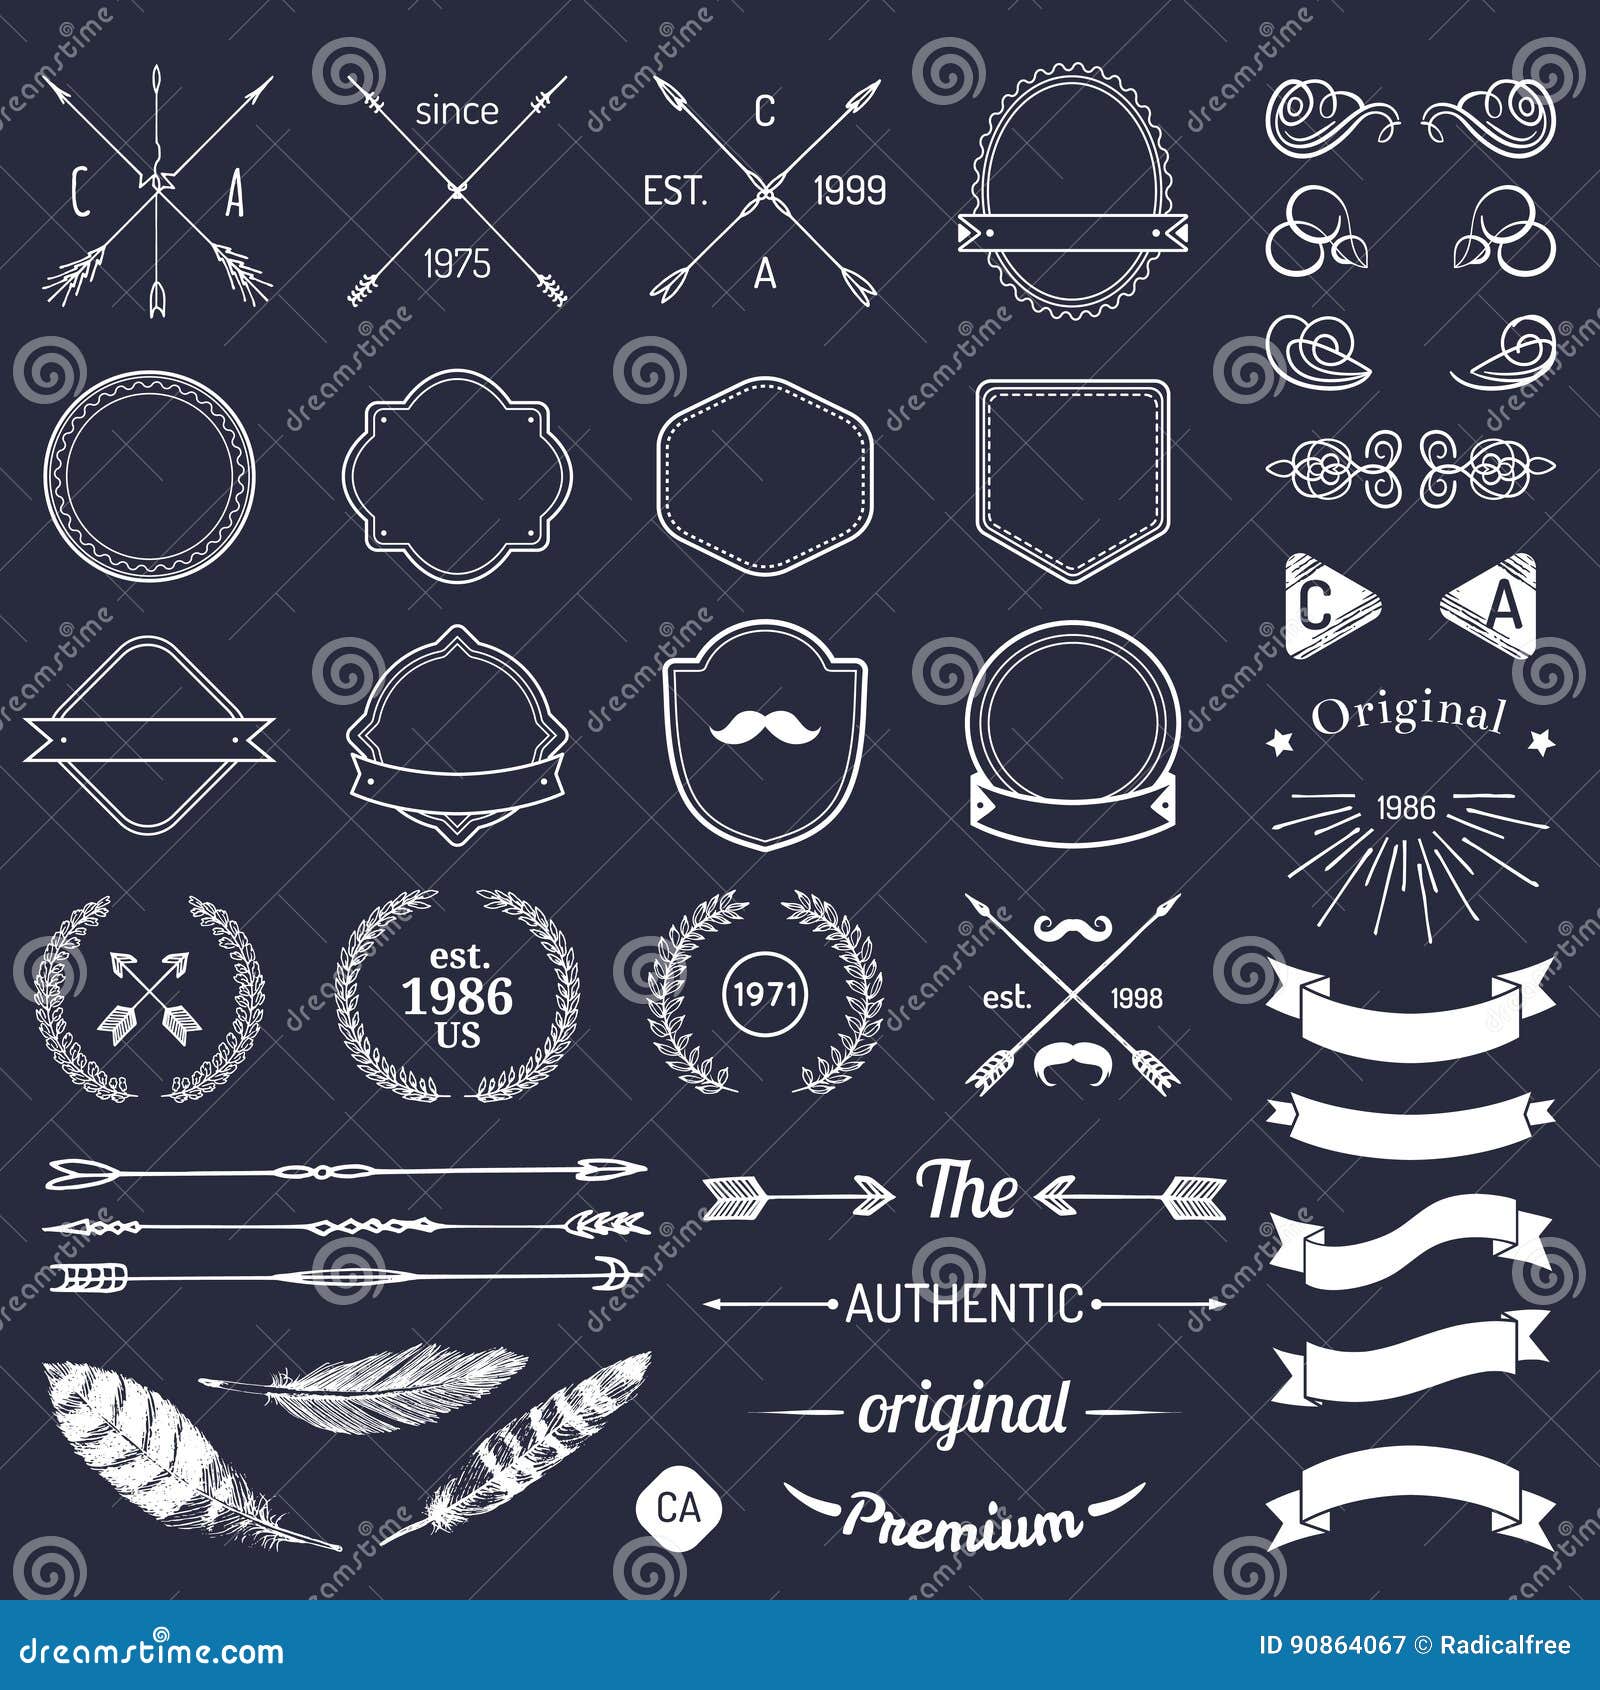 vintage hipster logo s with arrows,ribbons,feathers, laurels, badges. emblem template constructor. iicon creator.